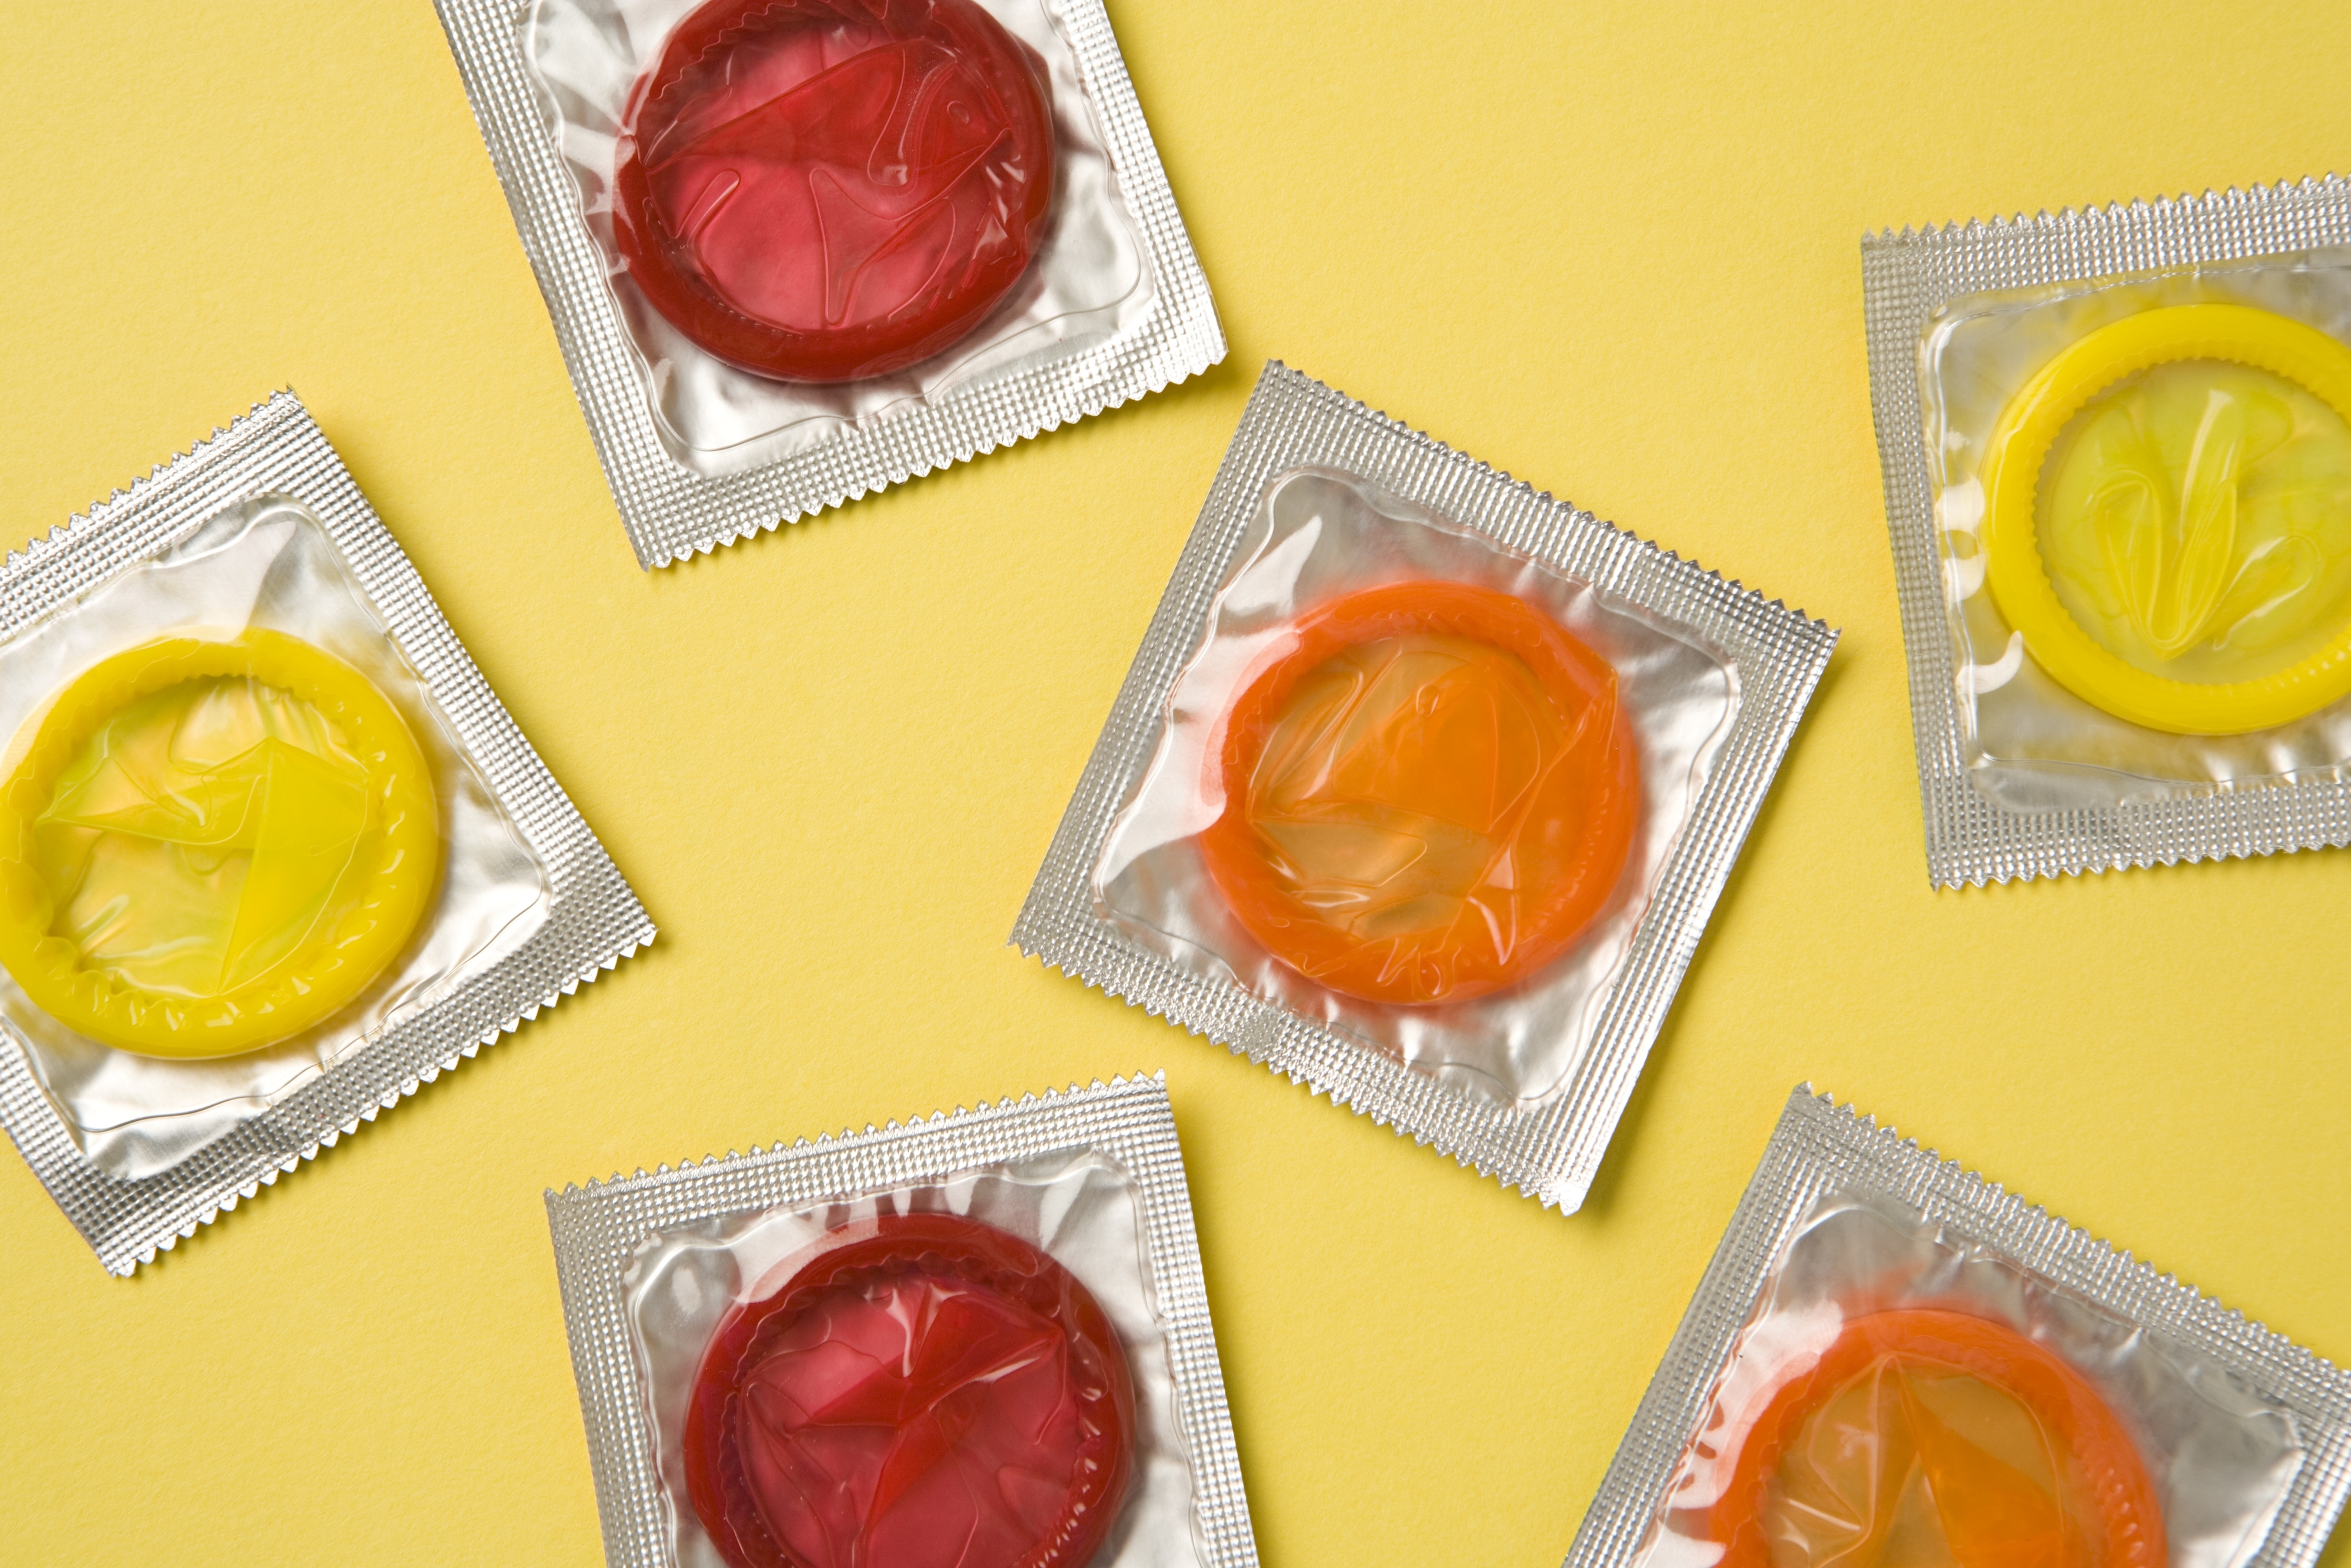 Six colorful condoms in packaging scattered on a yellow background